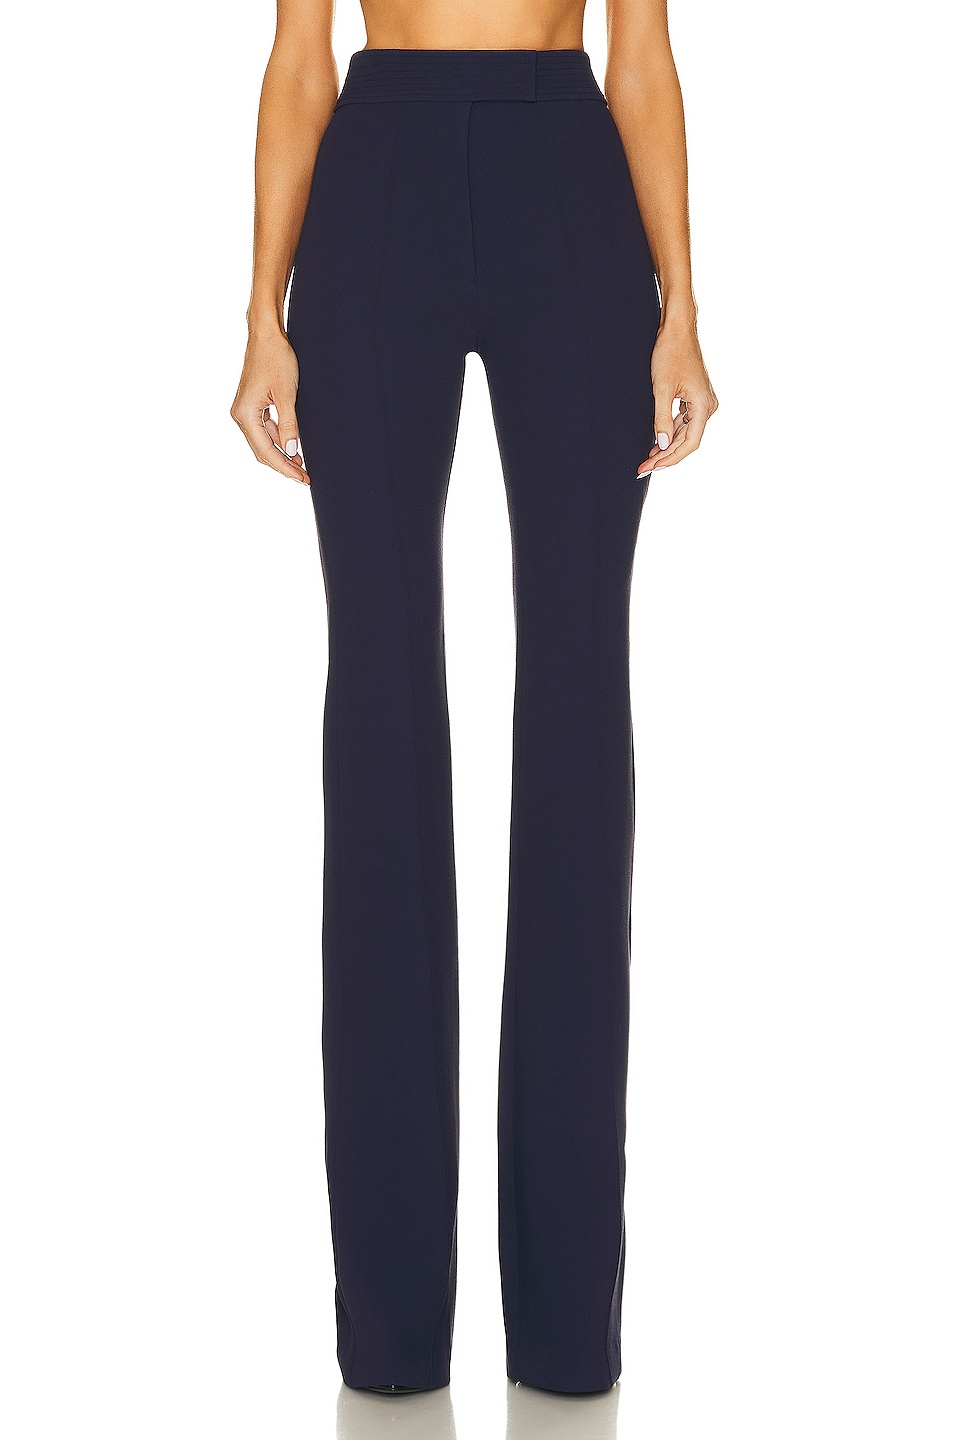 Image 1 of Alex Perry Marden Flare Pant in Navy